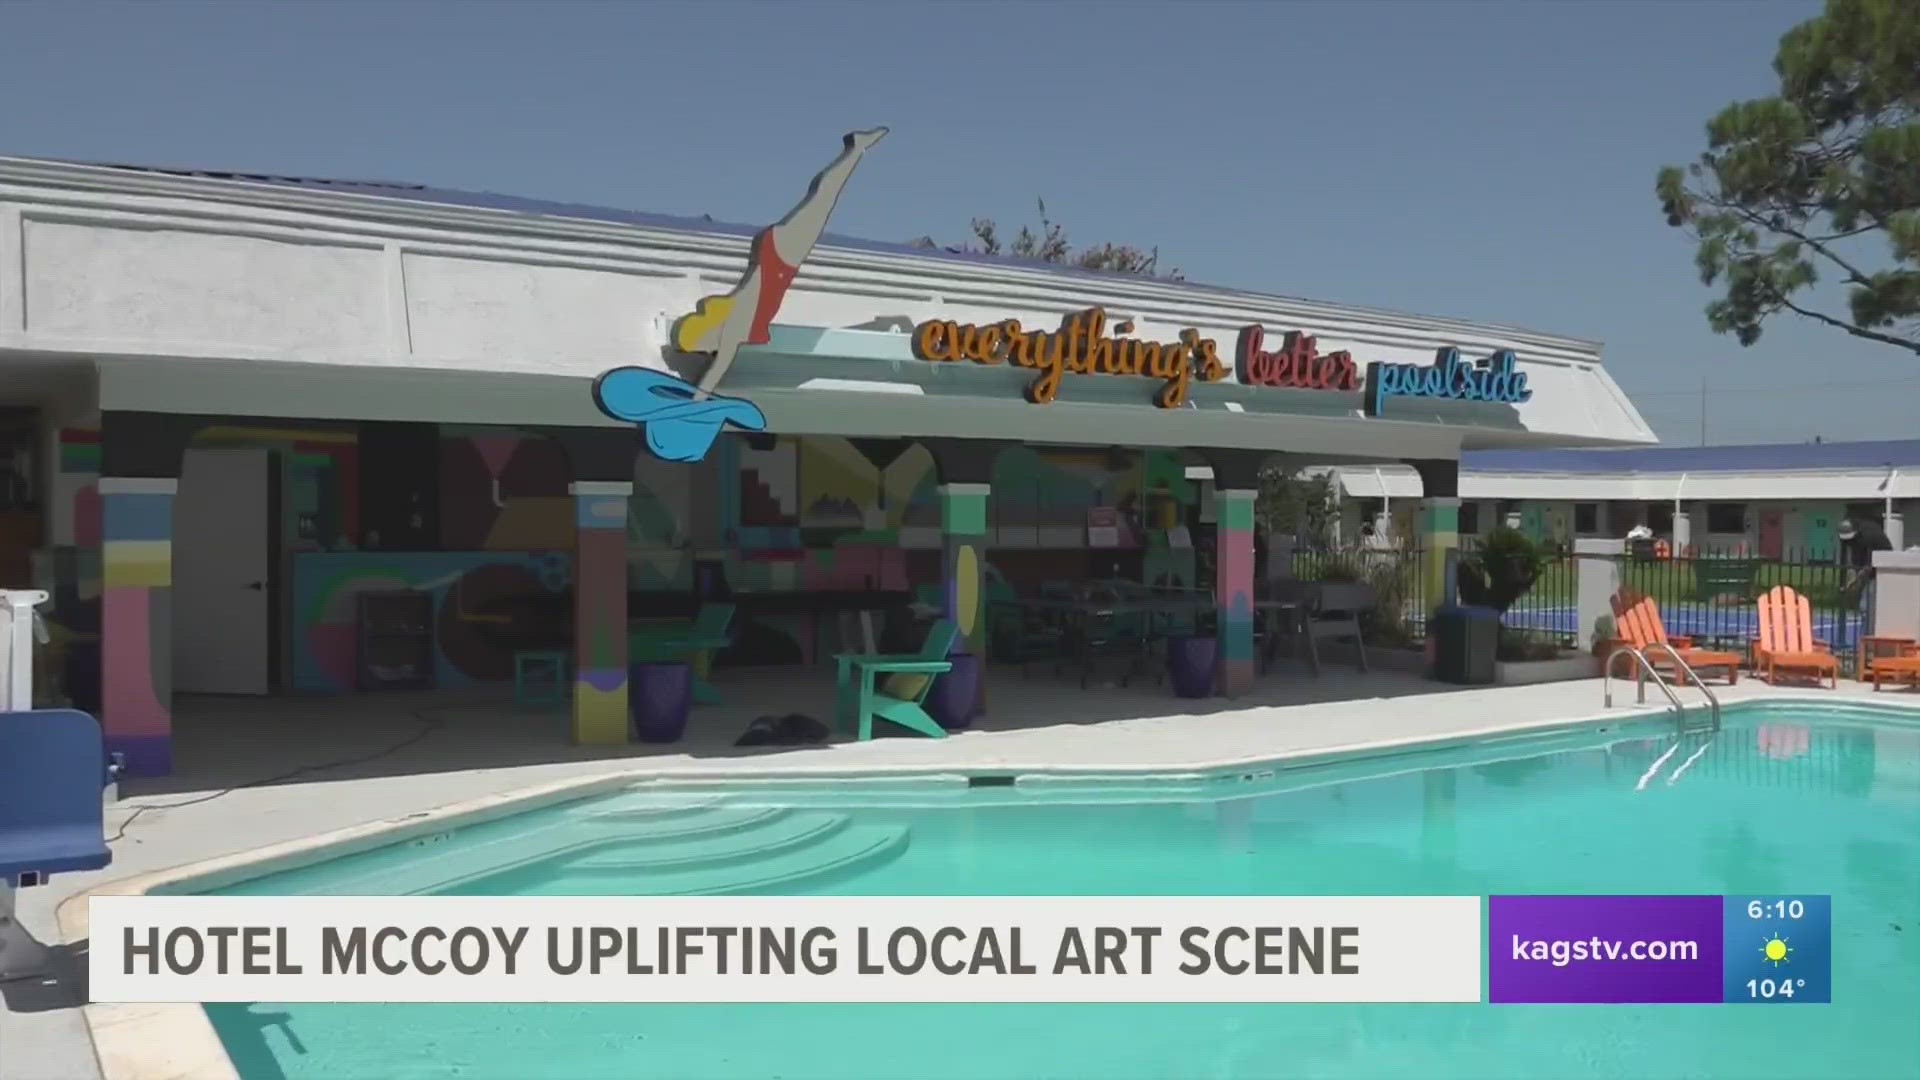 With art from local artists in all 52 of Hotel McCoy's rooms and amenities, the attraction wants to be a center of displaying community talents.